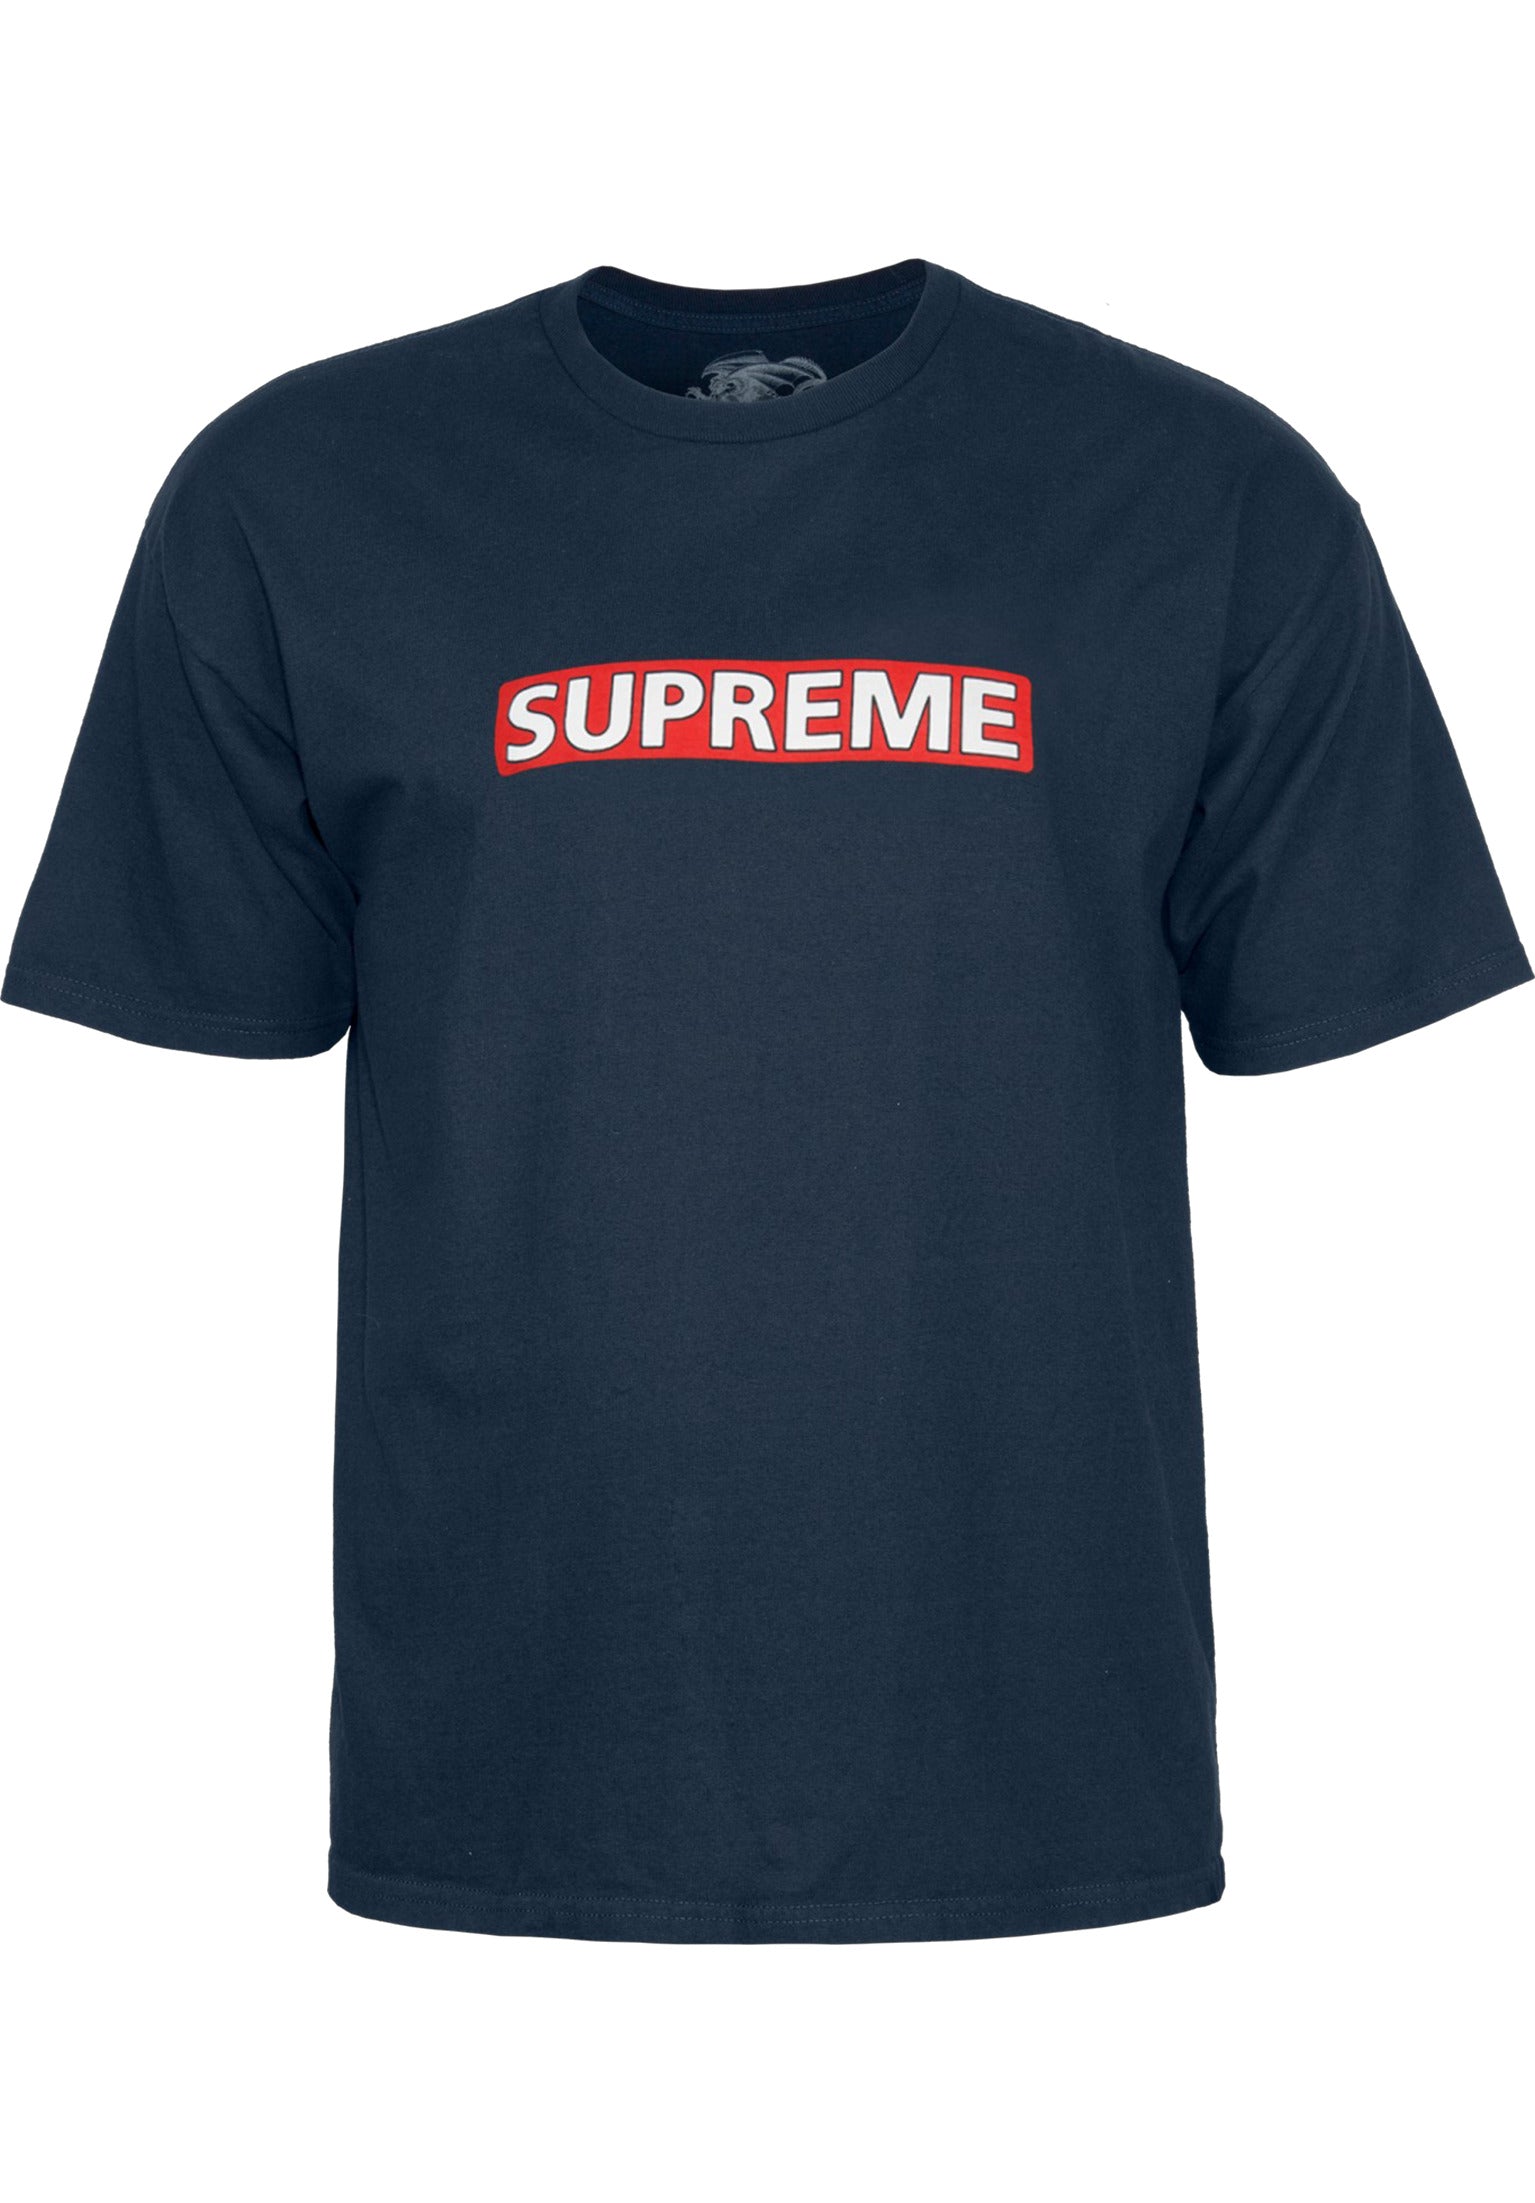 Supreme Powell-Peralta T-Shirt in navy for Men – TITUS